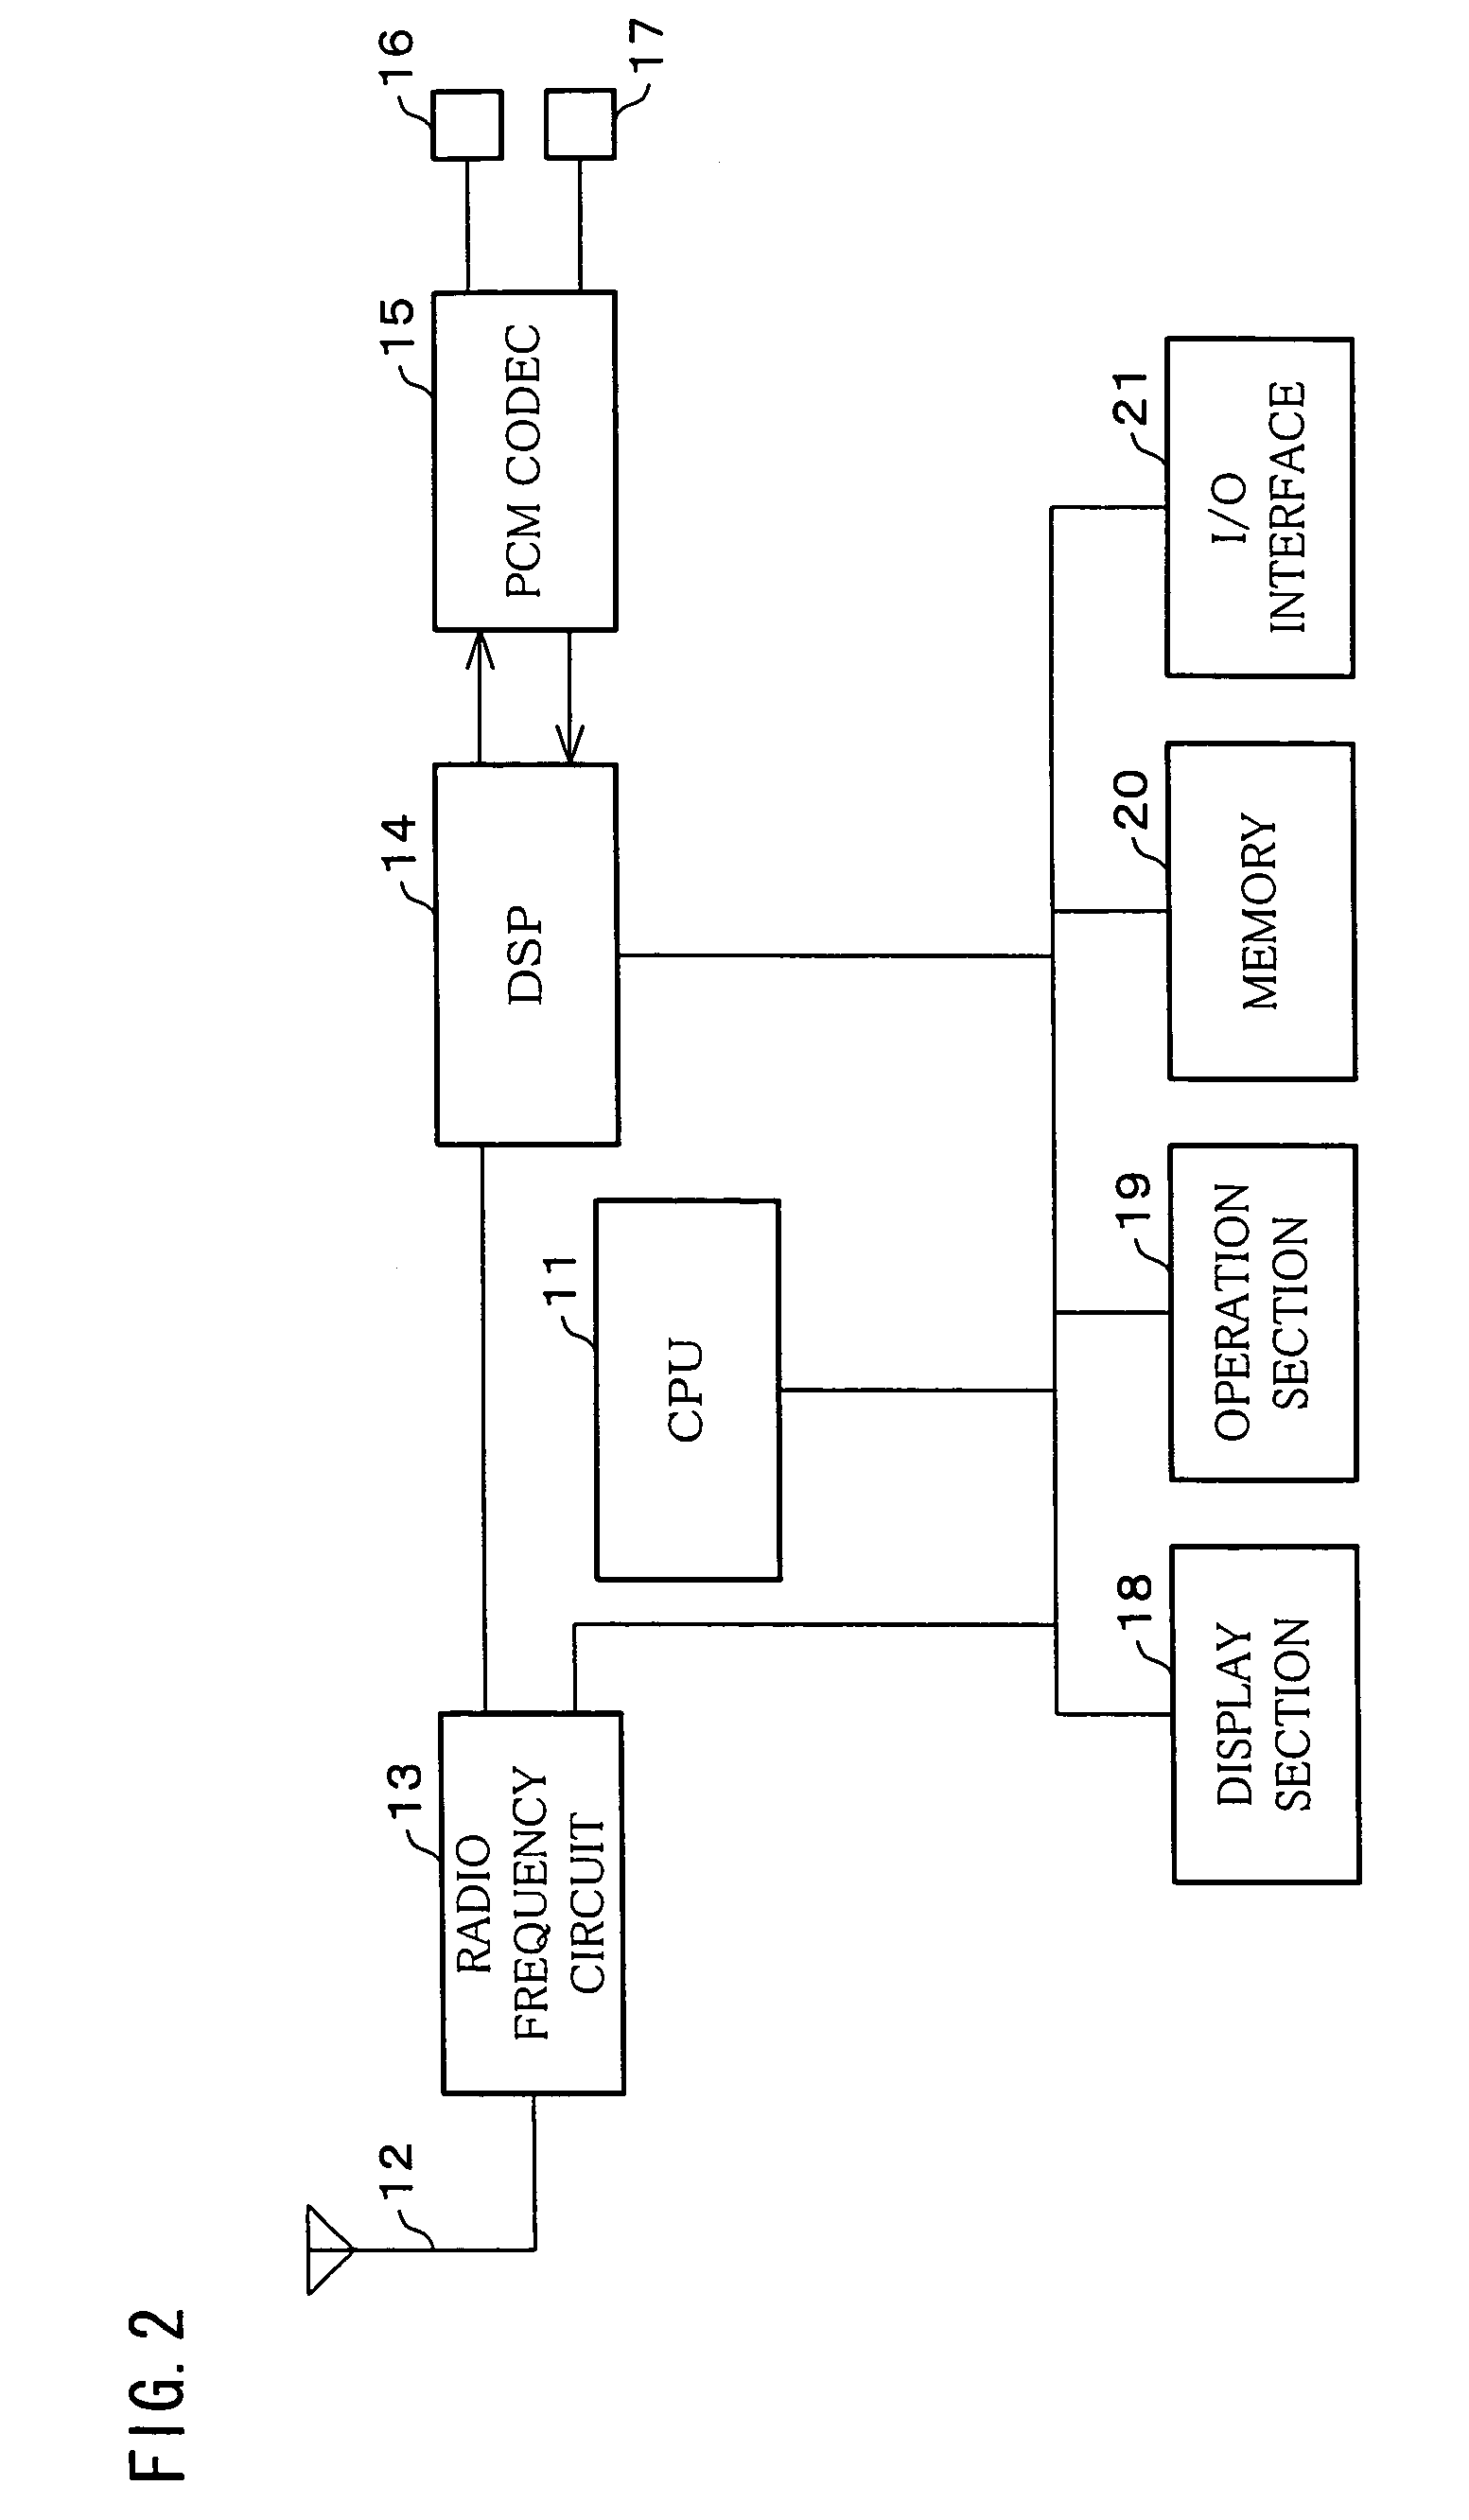 Cellular phone unit, control system of vehicle-mounted device, control method of cellular phone unit, control method of vehicle-mounted device, control program of cellular phone unit, control prgram of vehicle-mounted device, and recording medium recording the program